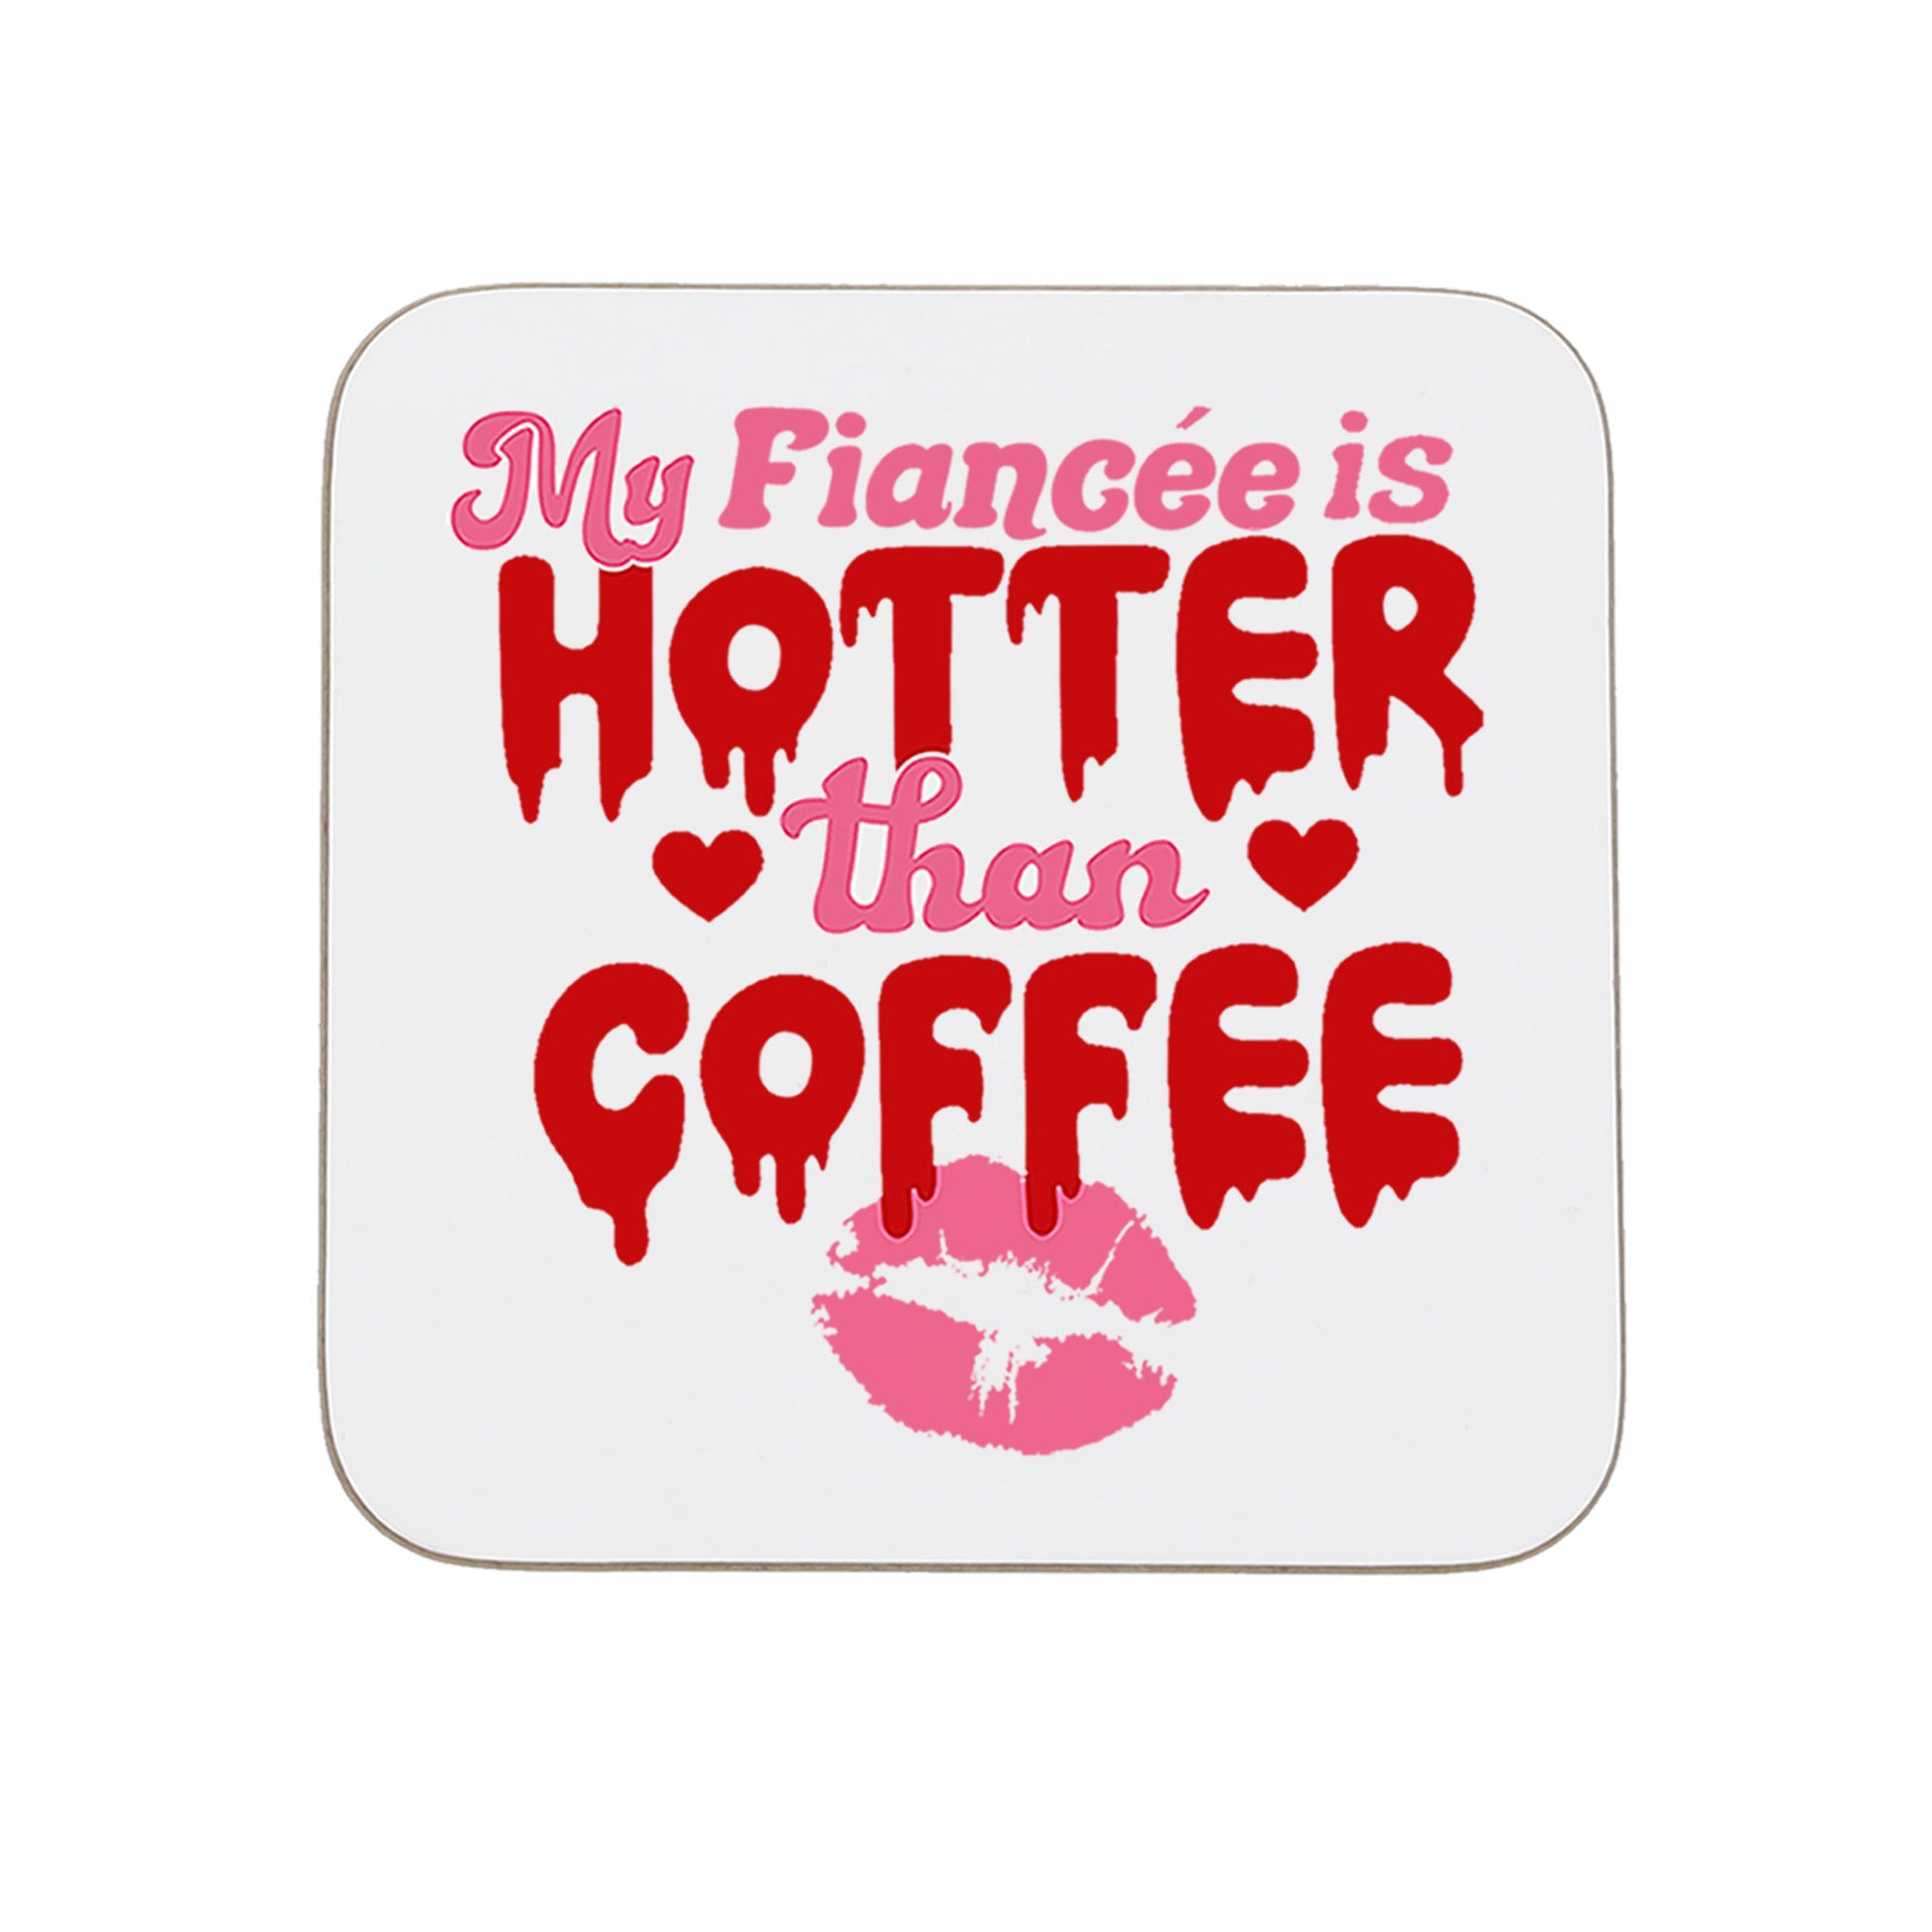 My Fiancé/Fiancée Is Hotter Than Coffee Mug and/or Coaster Gift  - Always Looking Good - Fiancée Printed Coaster On Its Own  